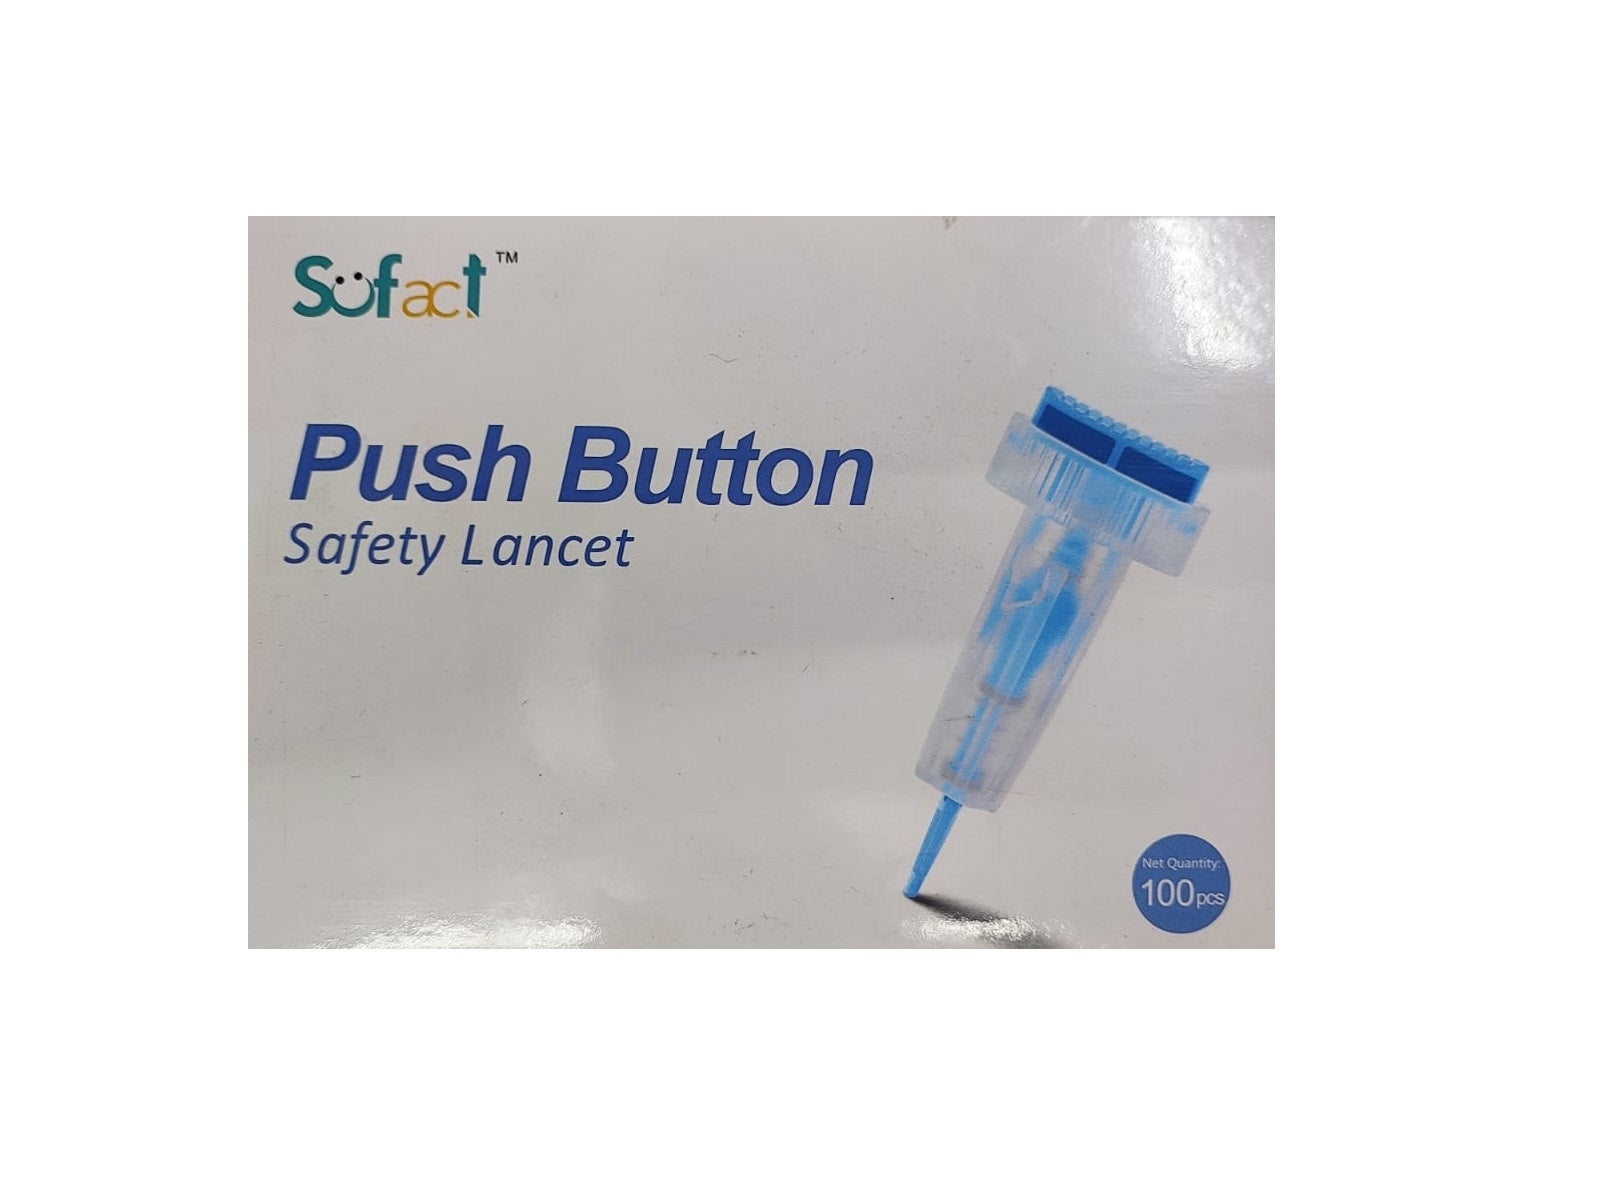 Painless & Safety Lancet Sofact with Push Button Ascensia